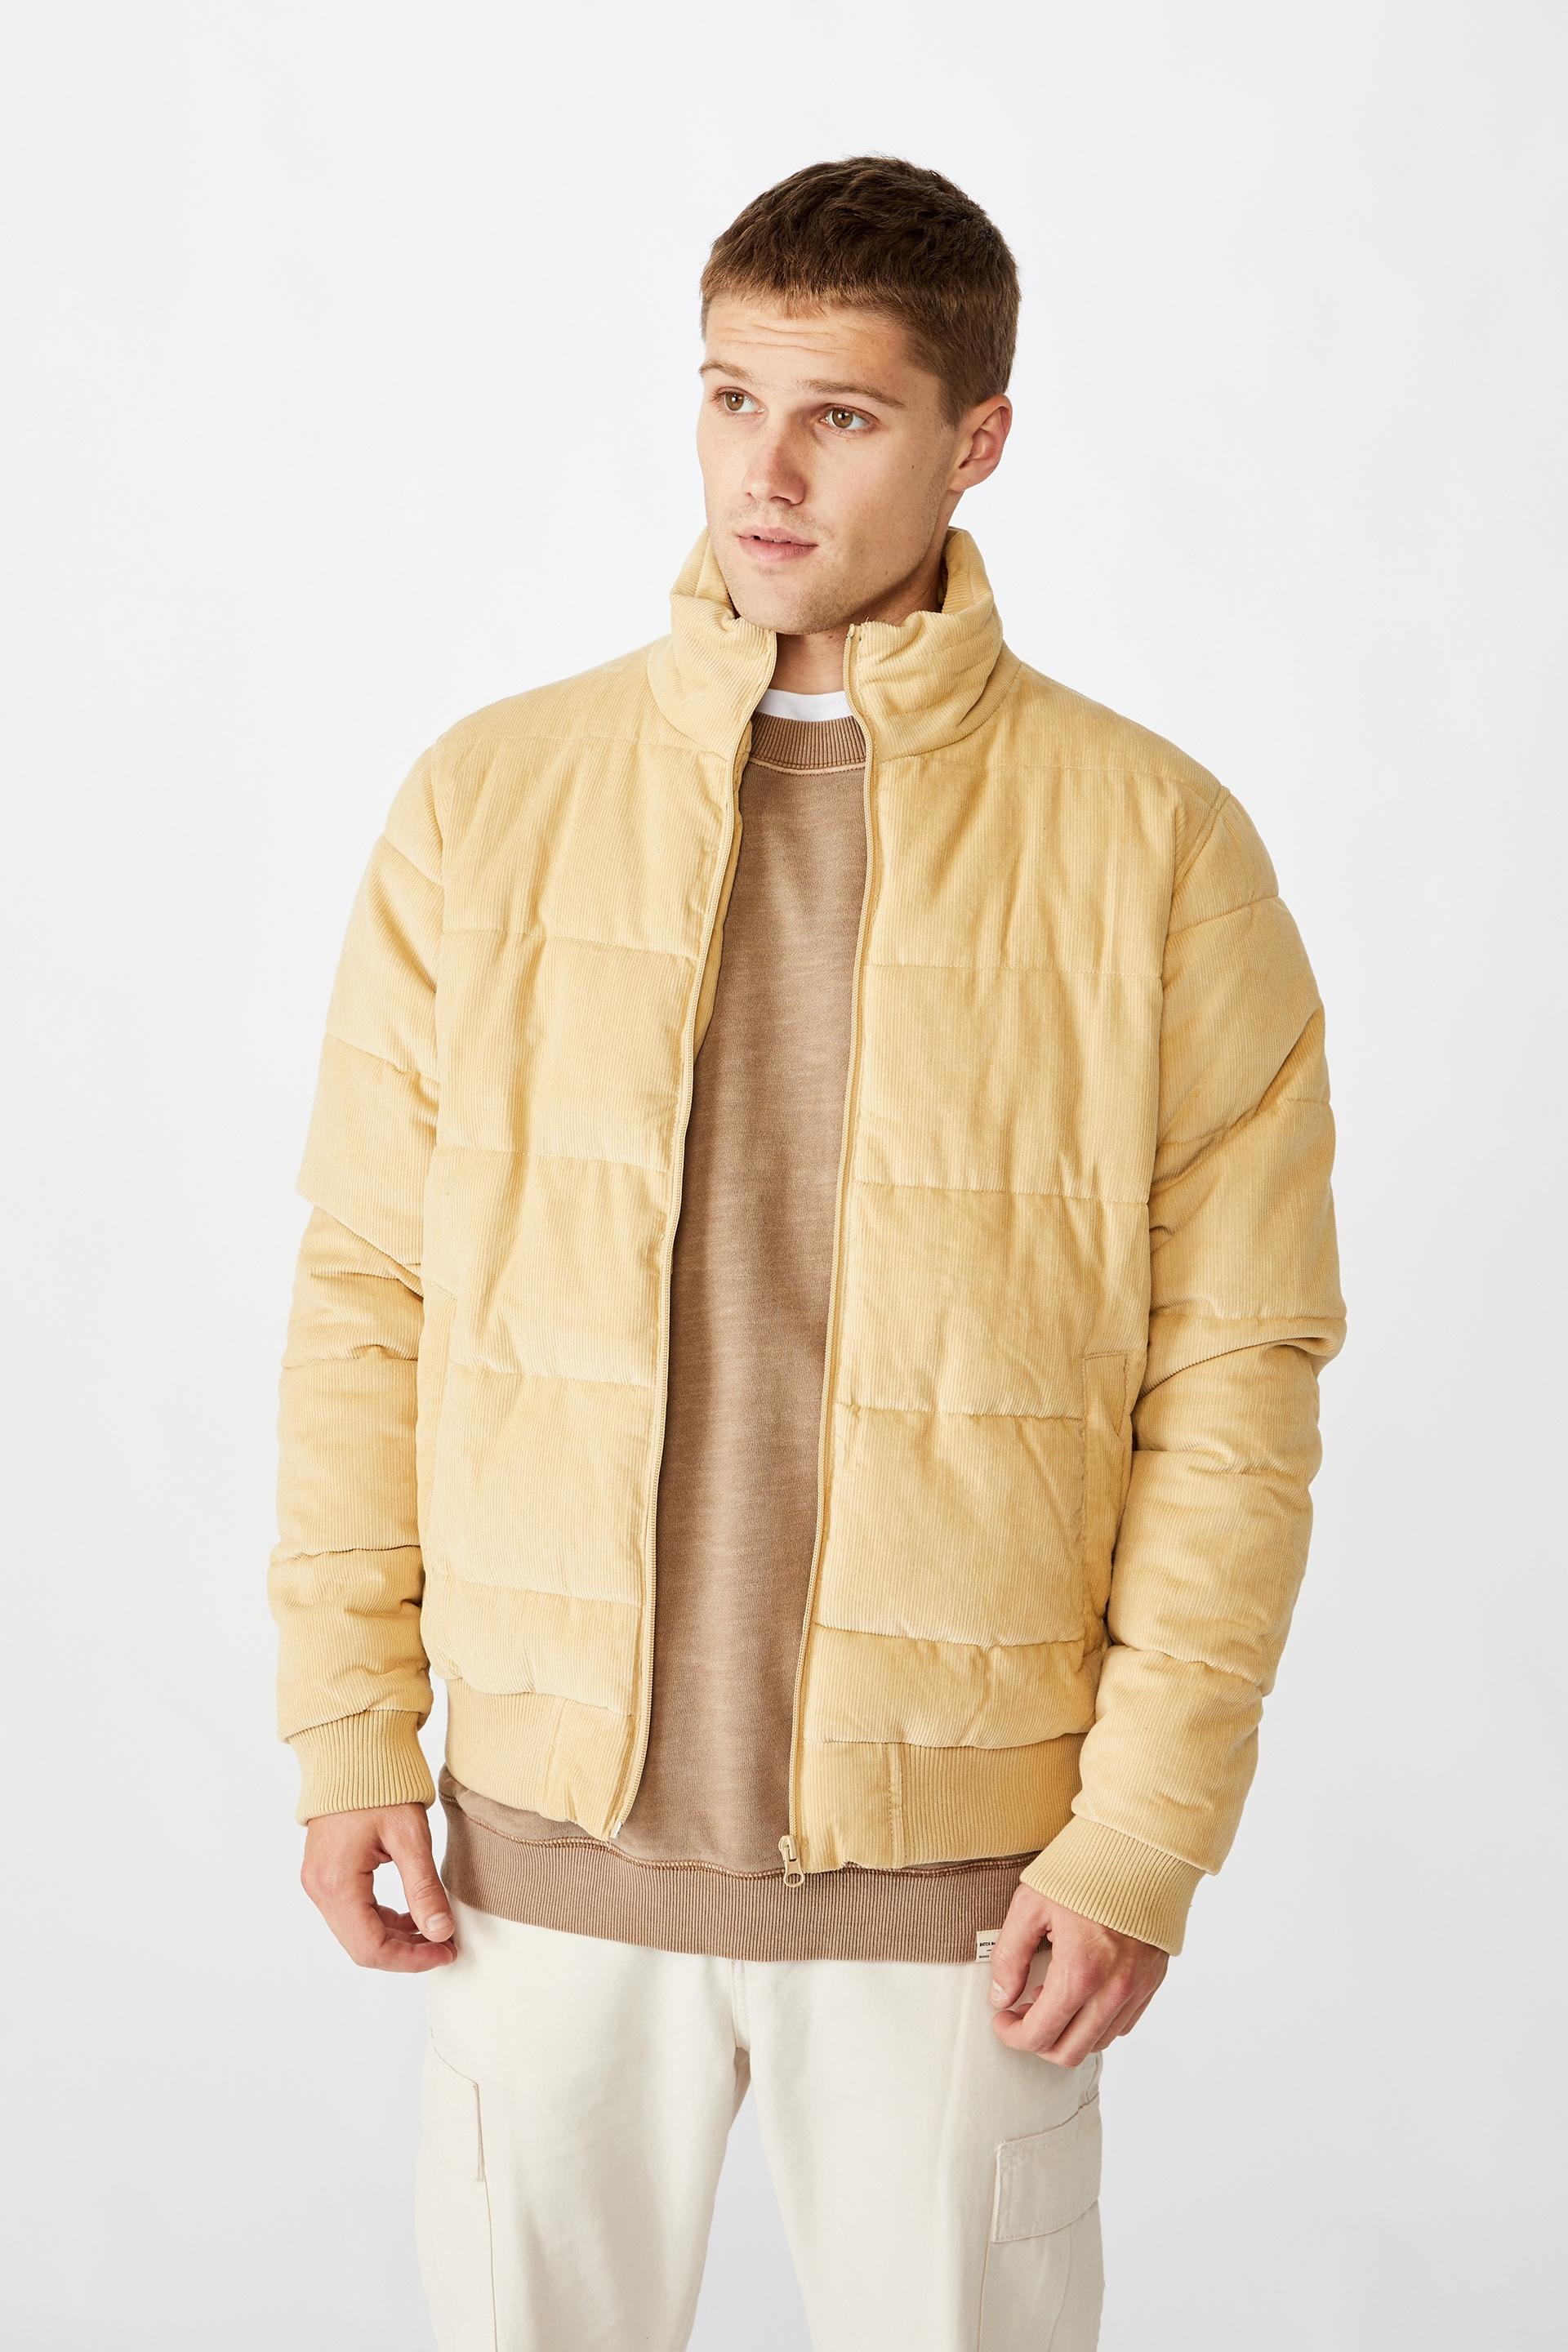 Cord puffer jacket - sand Cotton On Jackets | Superbalist.com